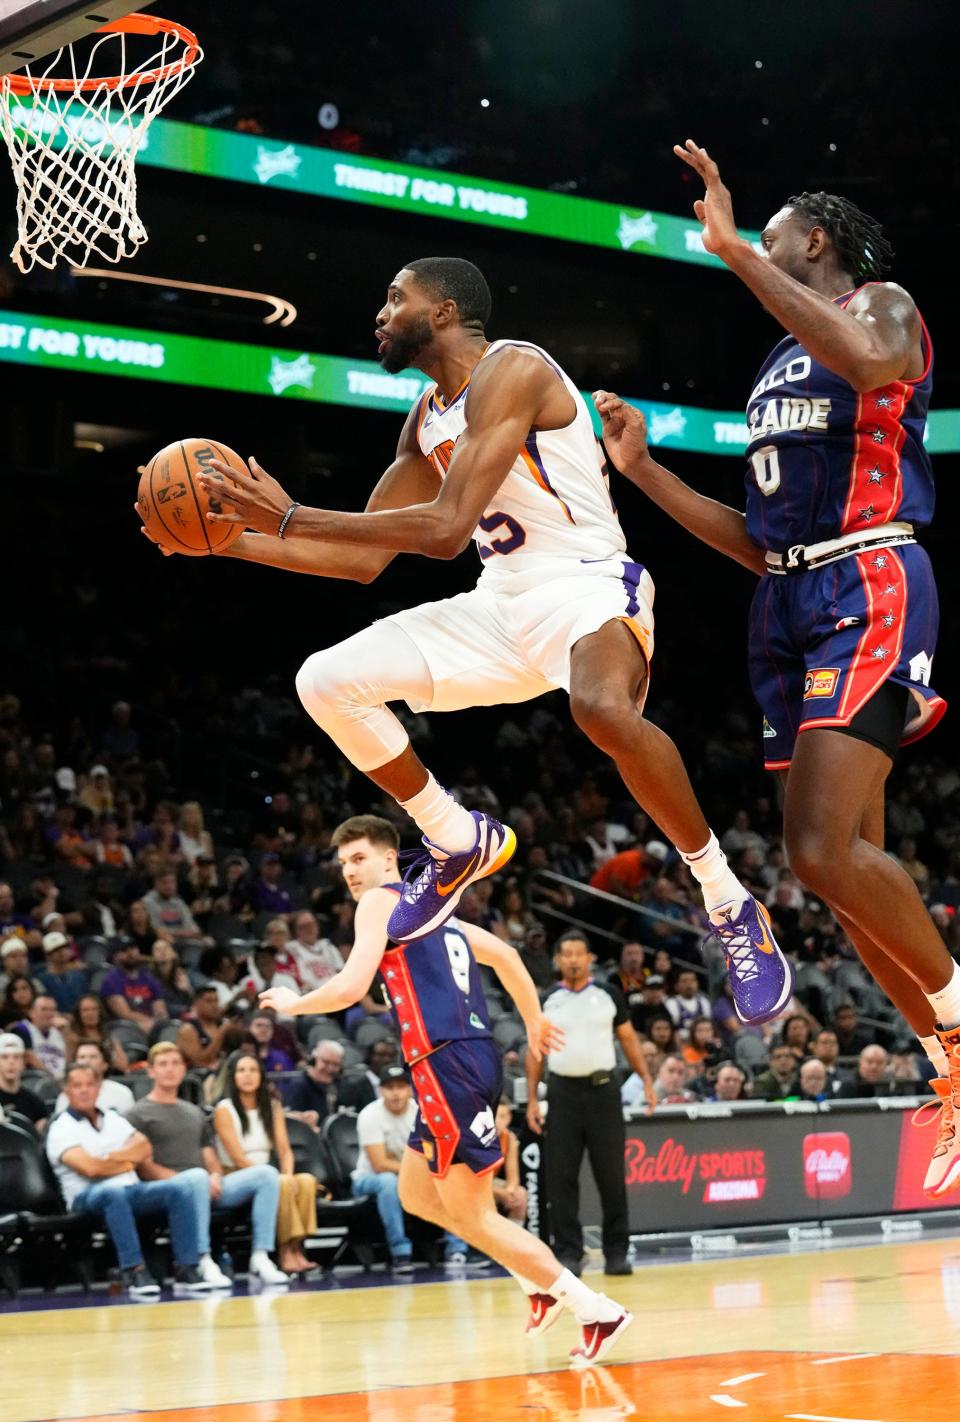 Phoenix Suns forward Mikal Bridges (25) drives to the basket past Adelaide 36ers guard Robert Franks (0) at Footprint Center in Phoenix on Oct. 2, 2022.